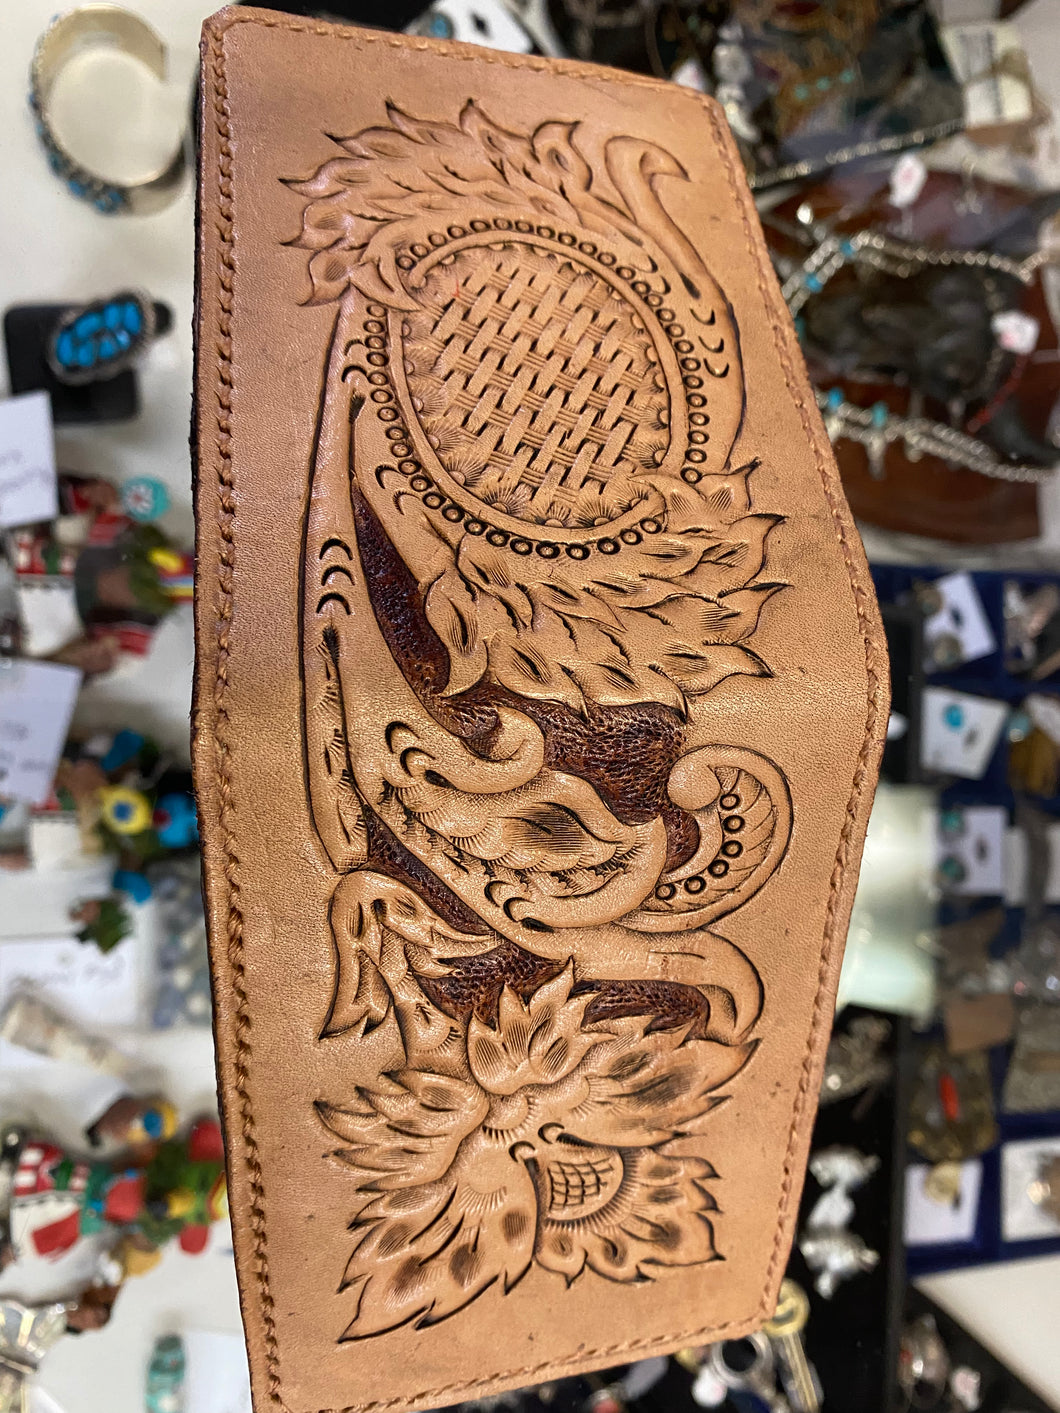 Leather tooled light colored wallet